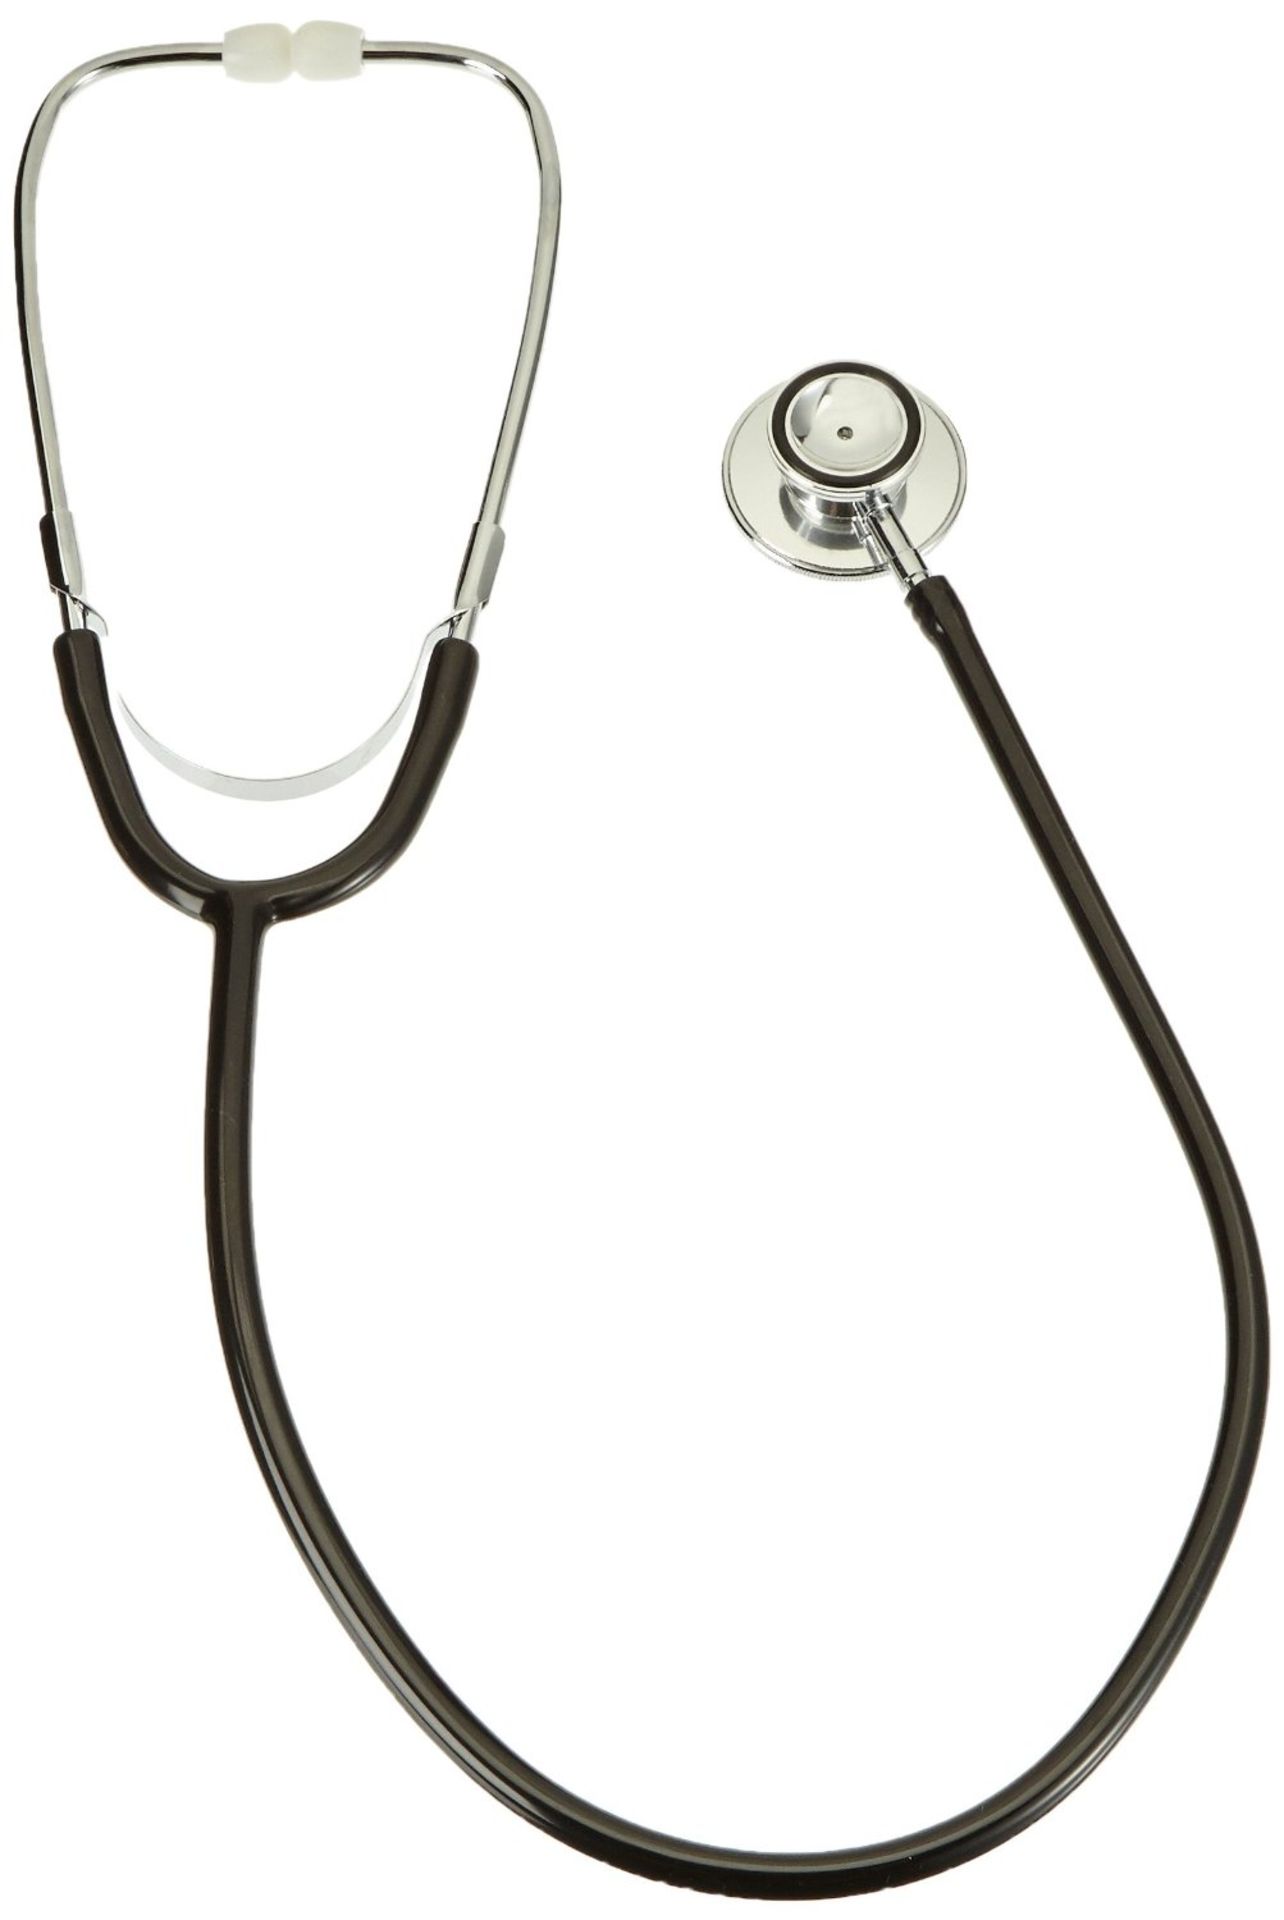 1 box of 10 medical items: Walking Frames, Cold Packs, Stethoscopes. Total RRP £150+ - Image 4 of 6